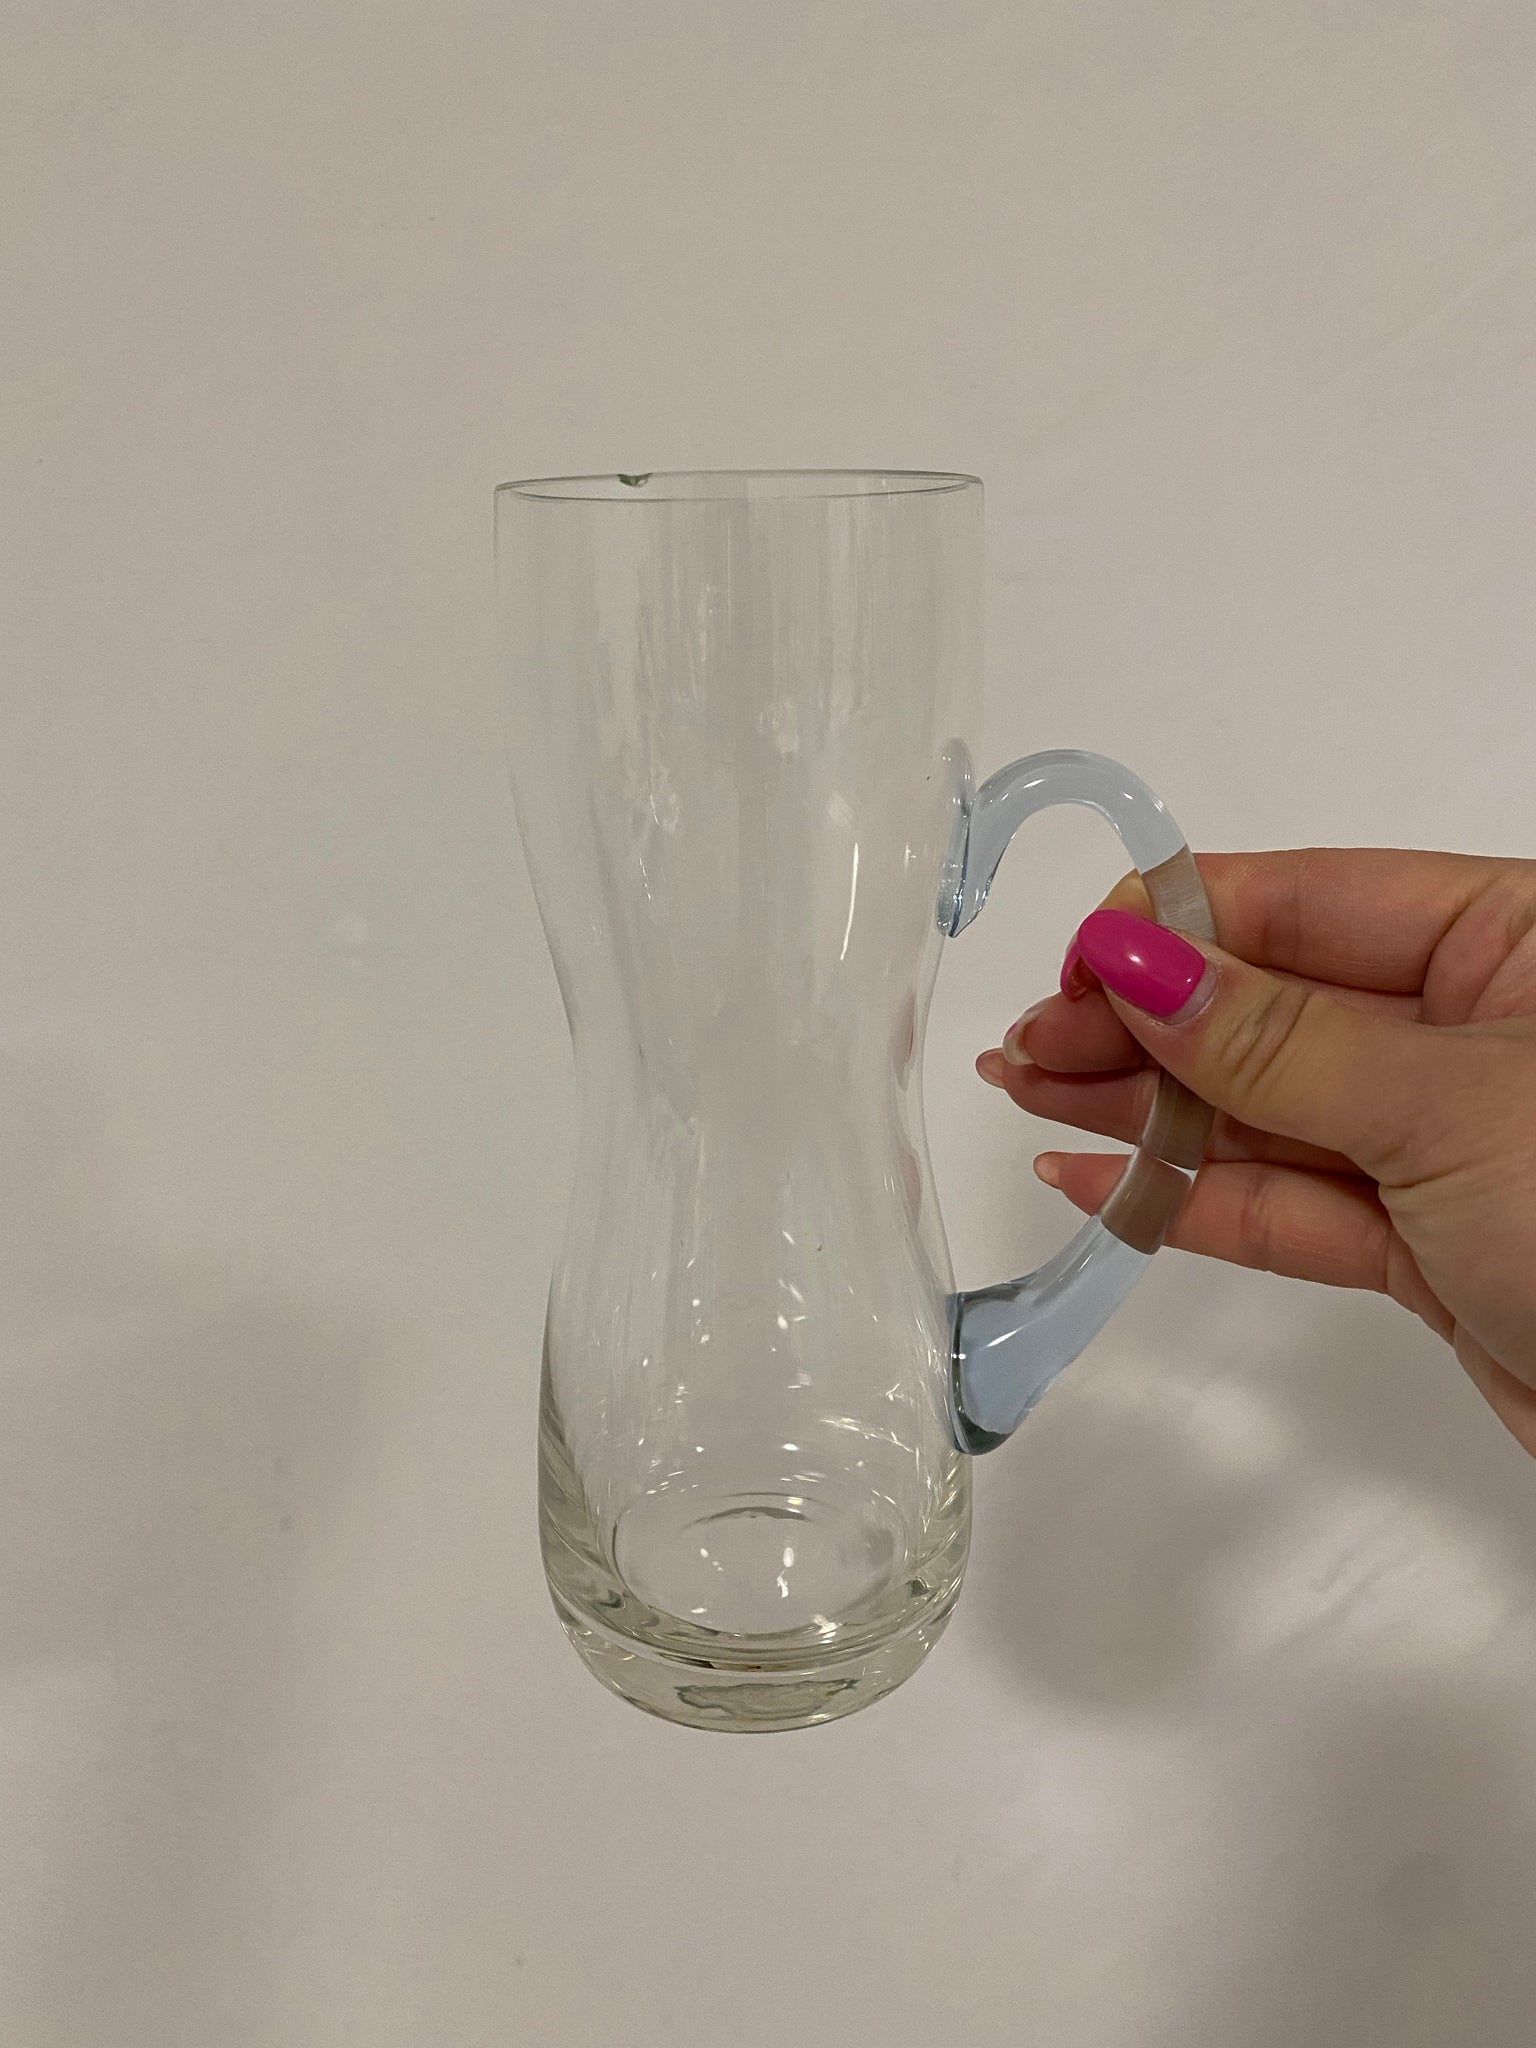 Tall glass mugs with colorful handles